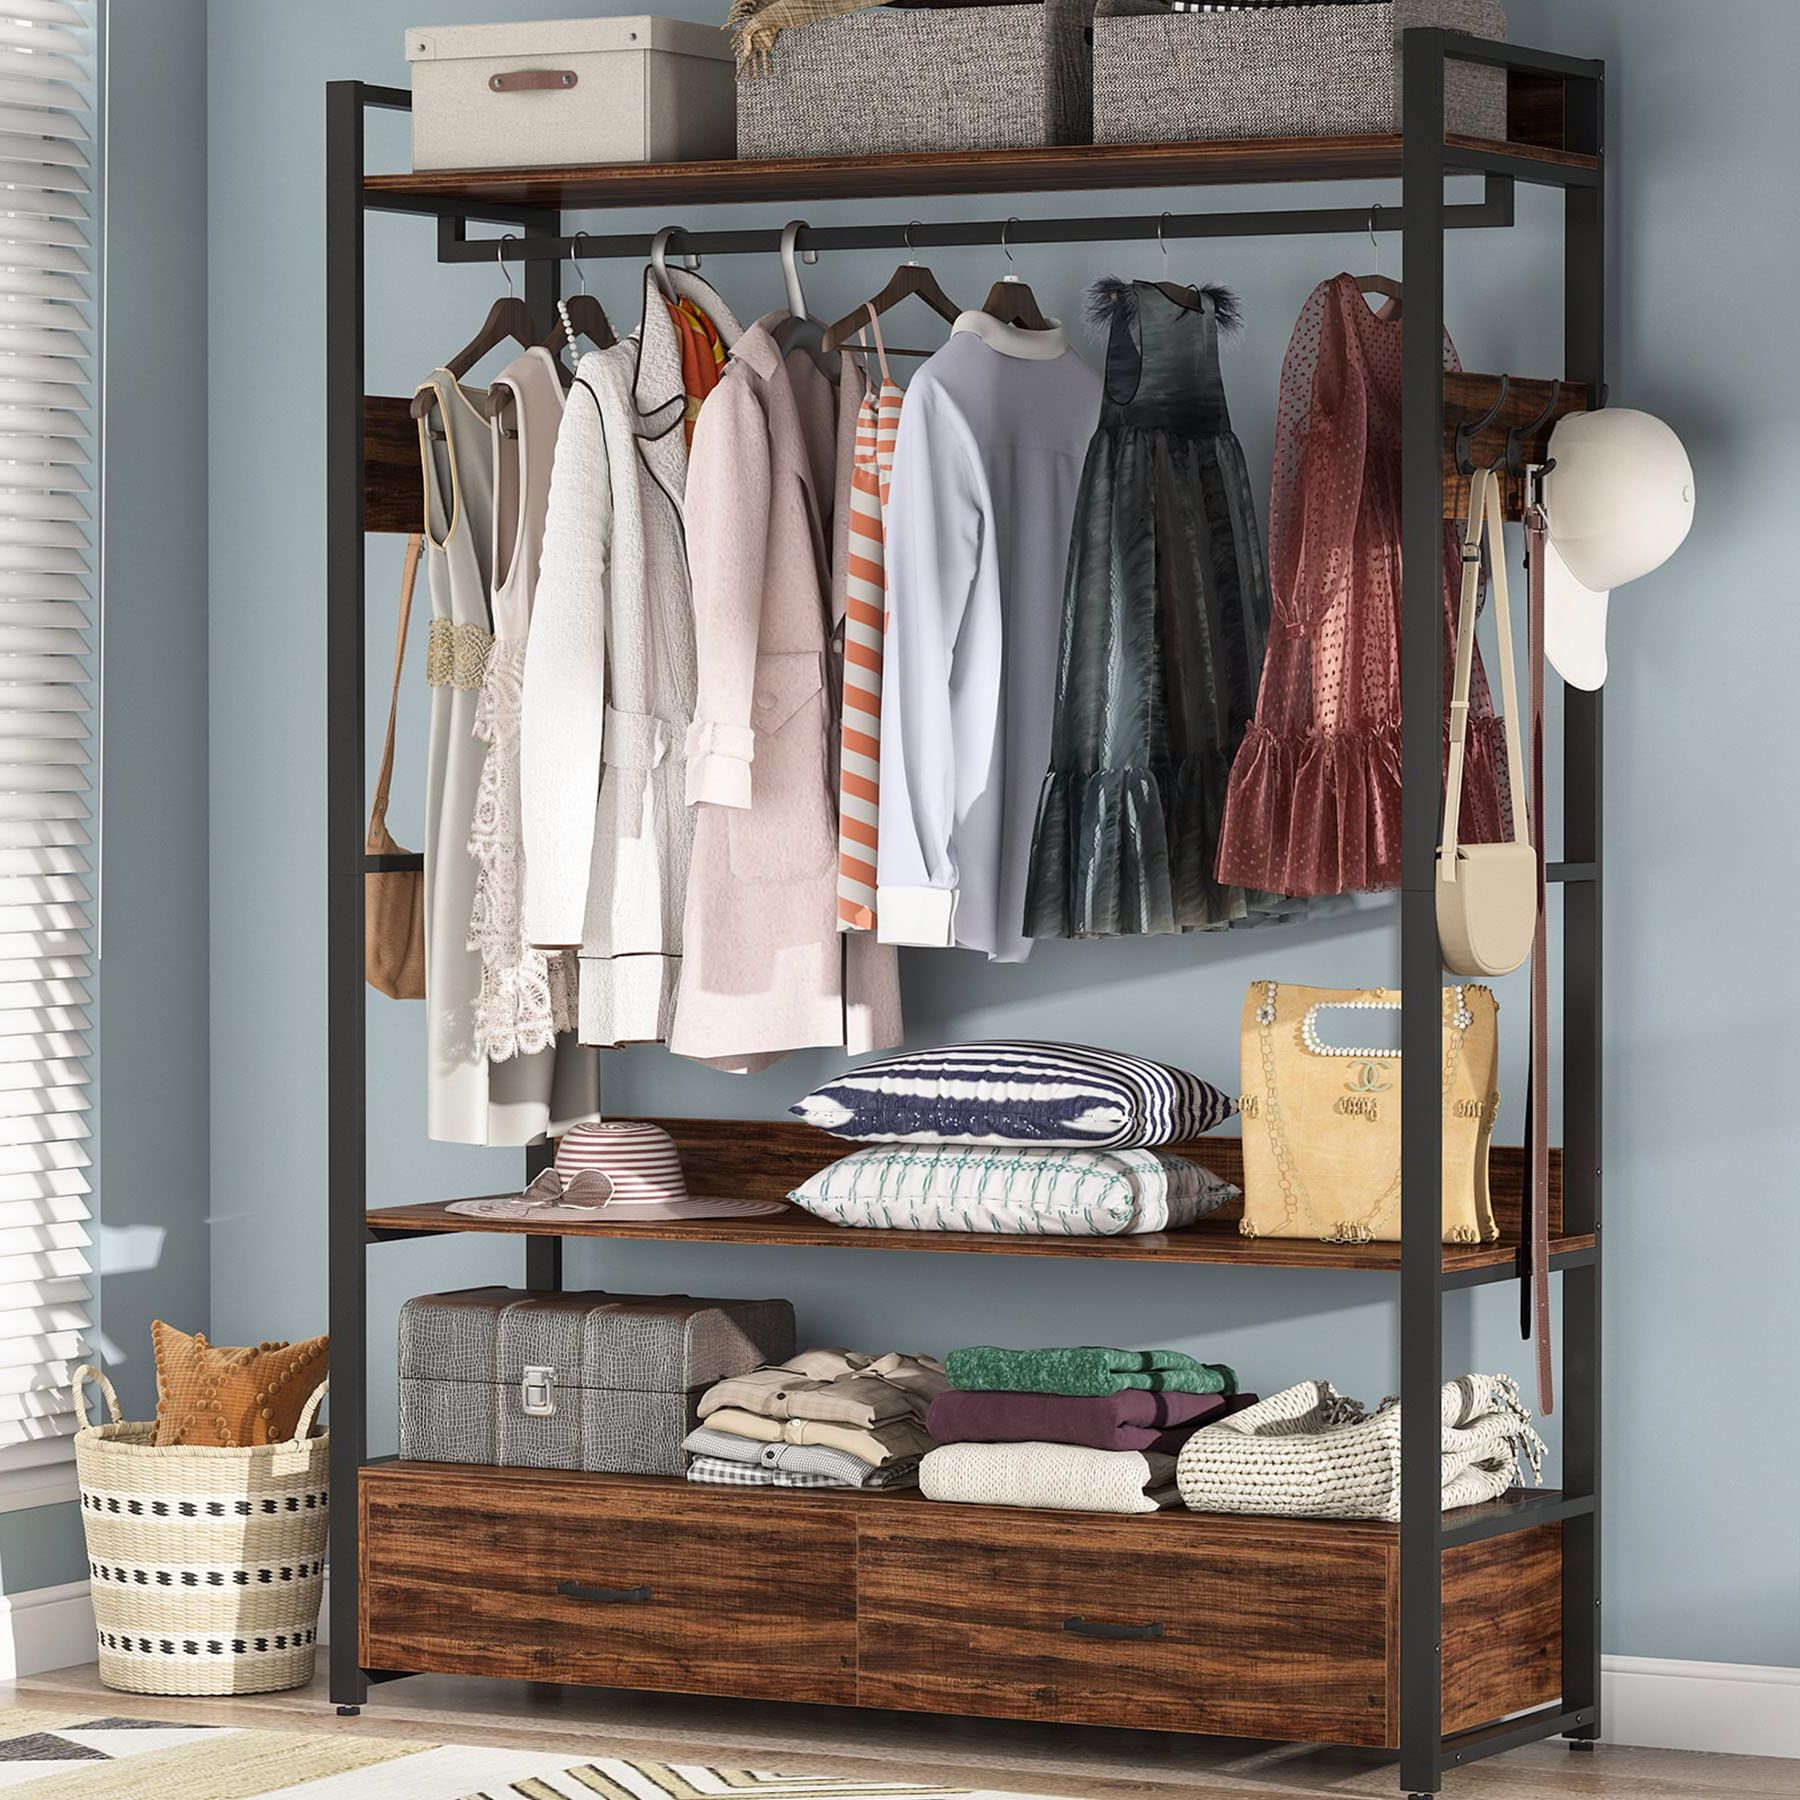 Amazon: Tribesigns Freestanding Clothes Rack Shelves, Closet Organizer  With Shelves Drawers And Hooks, Heavy Duty Garment Clothing Wardrobe  Storage Shelving With Hanging Rod, Rustic : Home & Kitchen Pertaining To Trendy Clothes Rack Wardrobes (View 2 of 10)